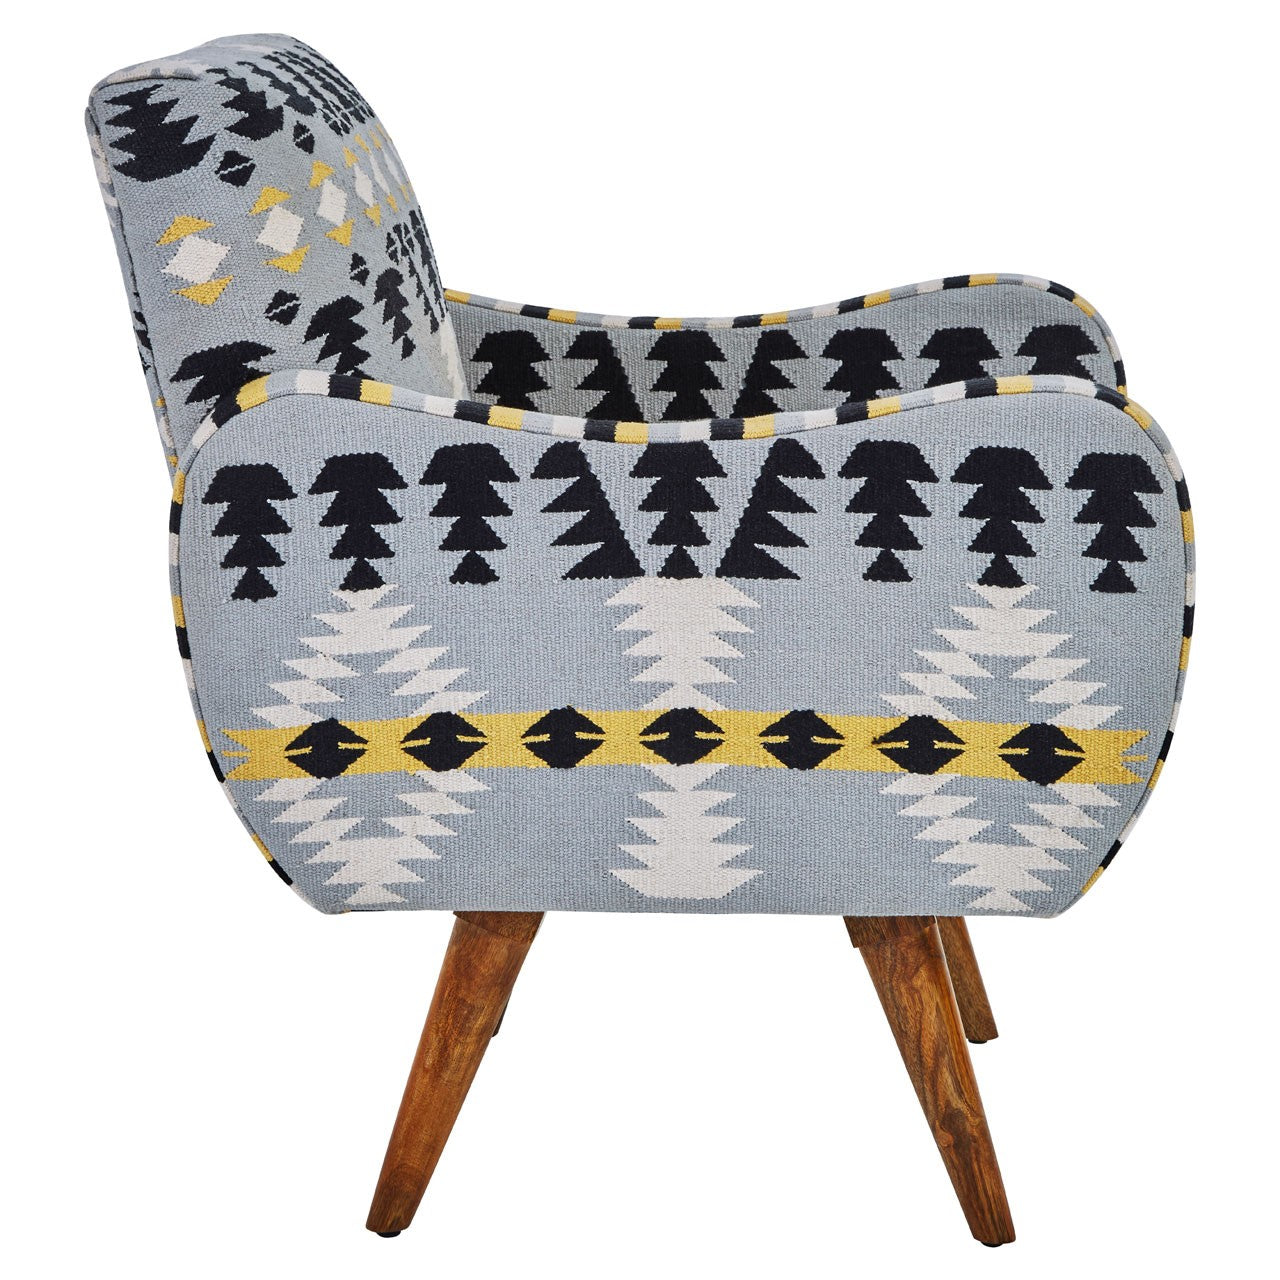 Boho Inspired Navajo Meets Scandi Style Arm Chair featuring Geometric Patterns